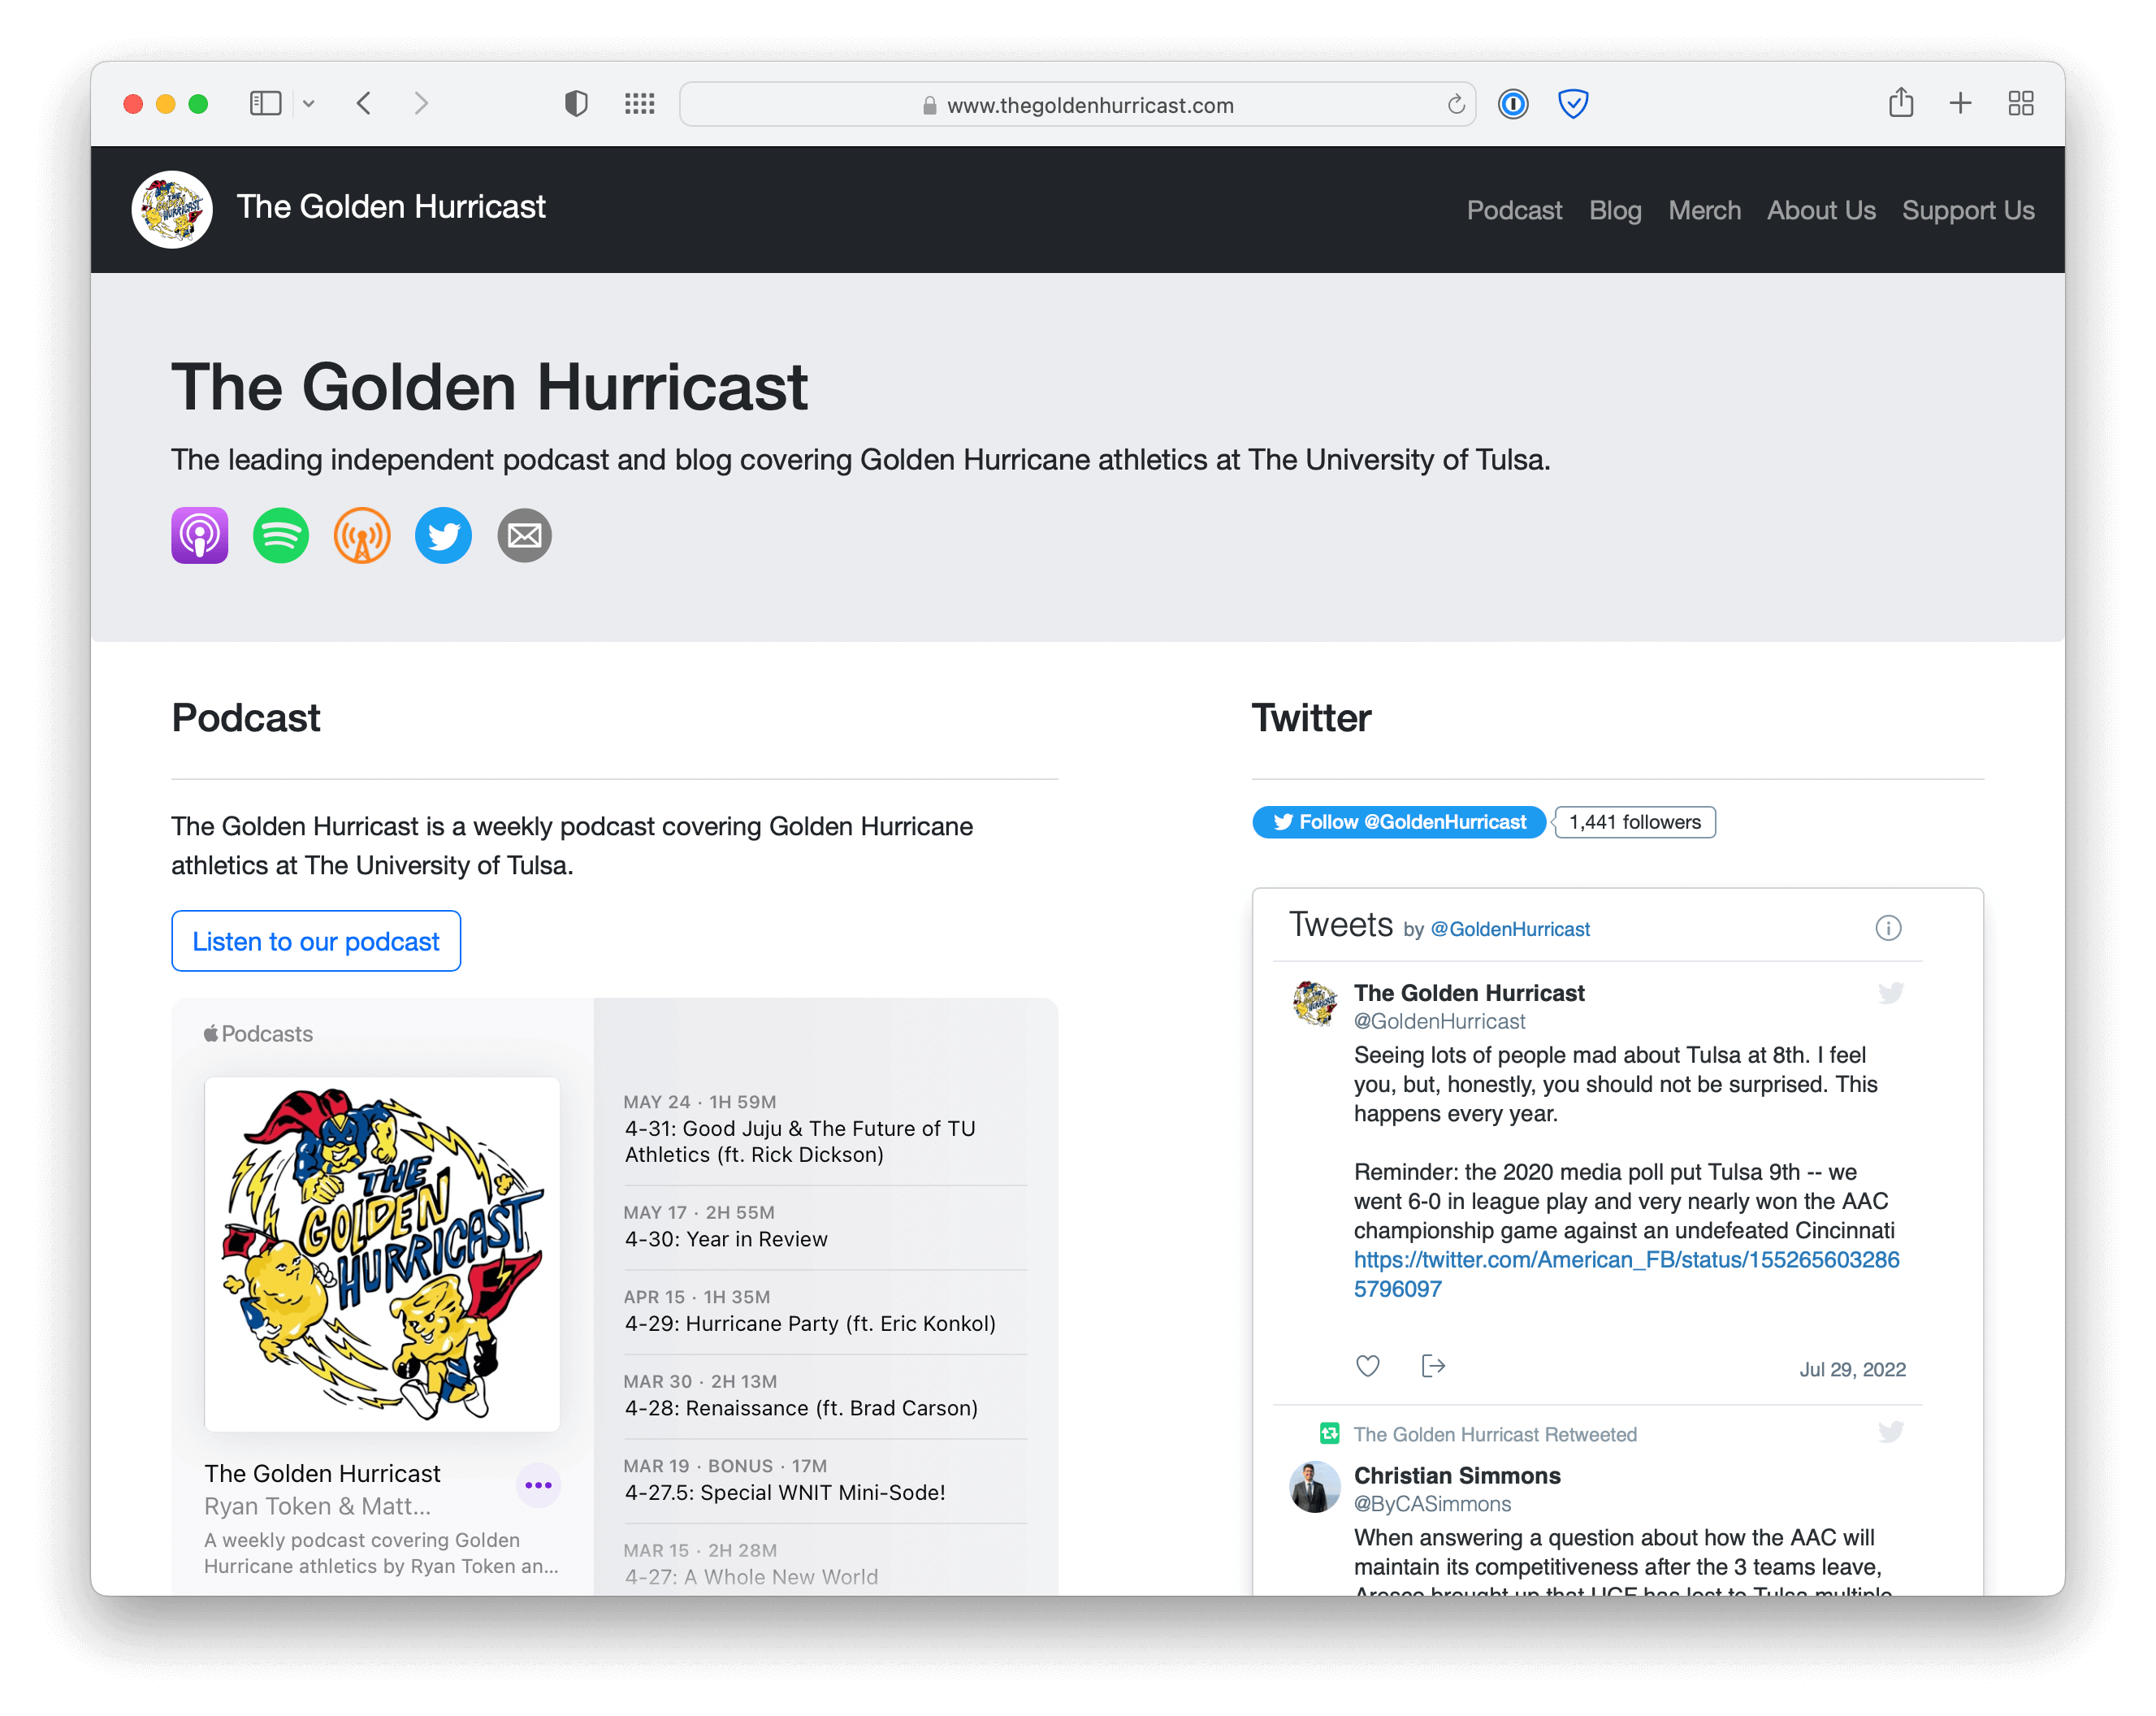 The Golden Hurricast home page